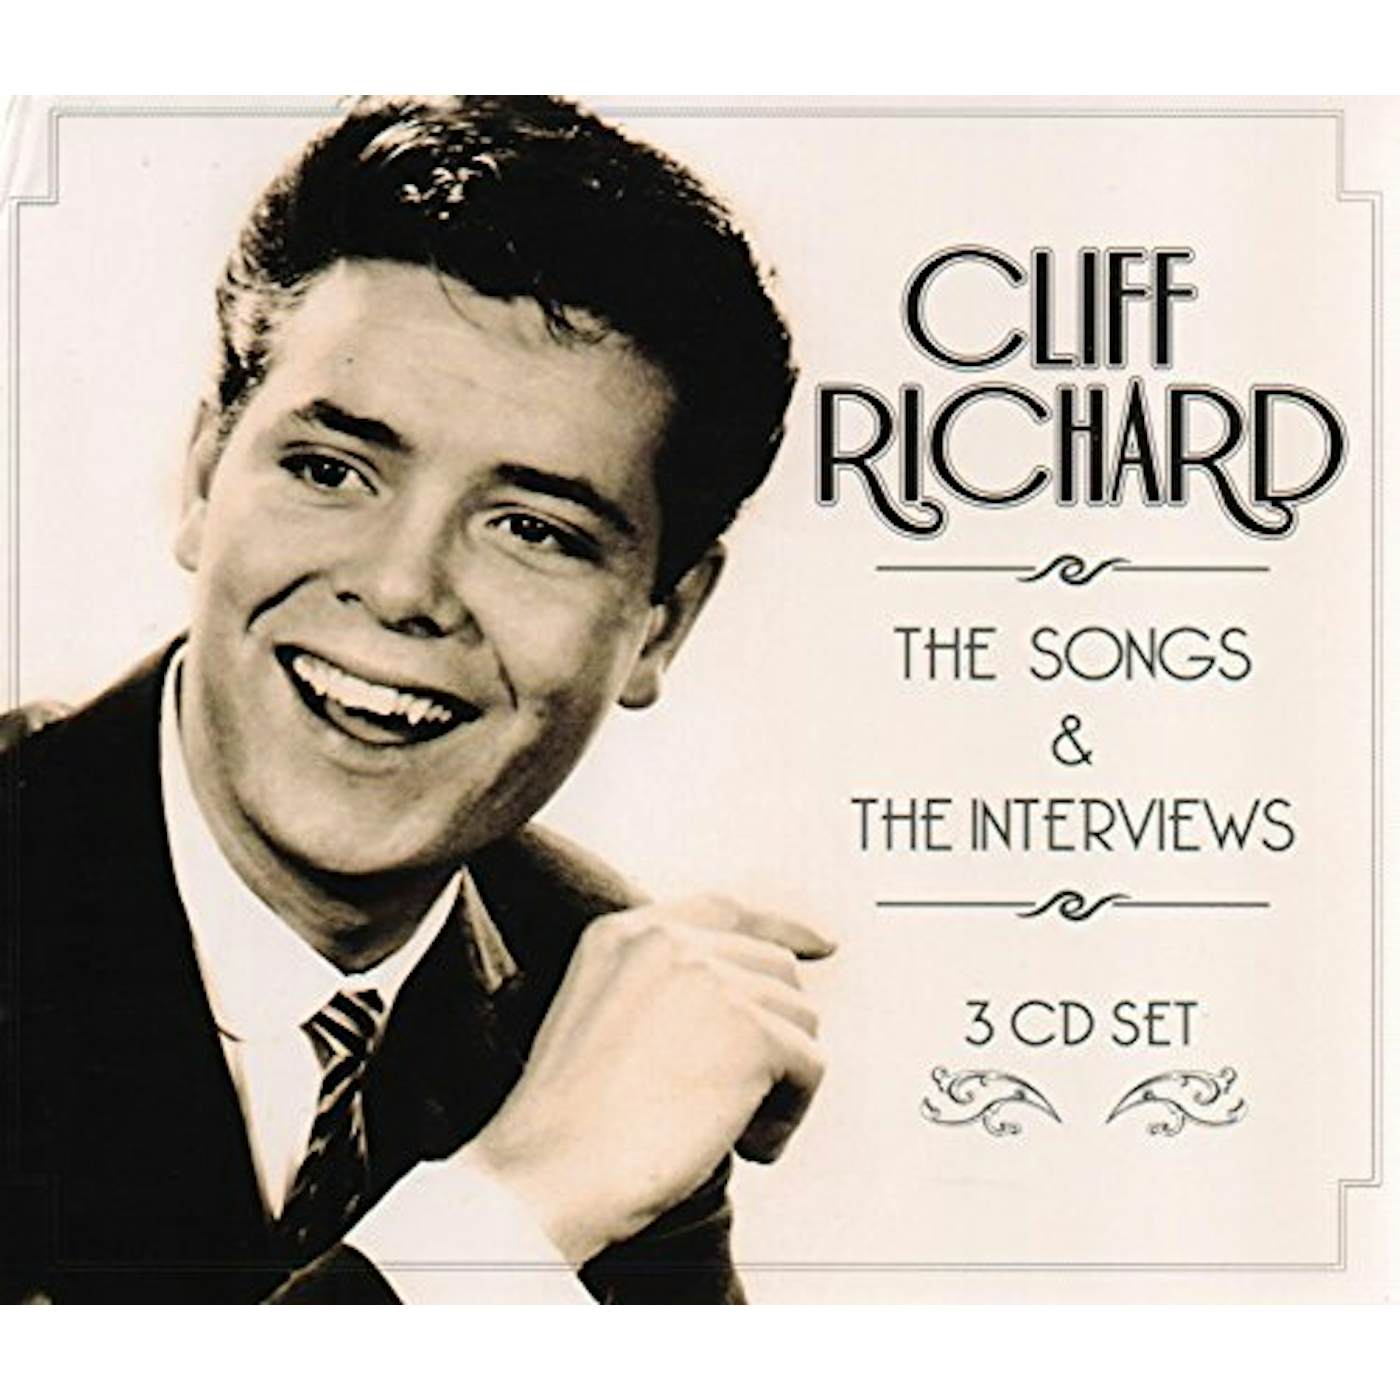 Cliff Richard SONGS & THE INTERVIEWS CD